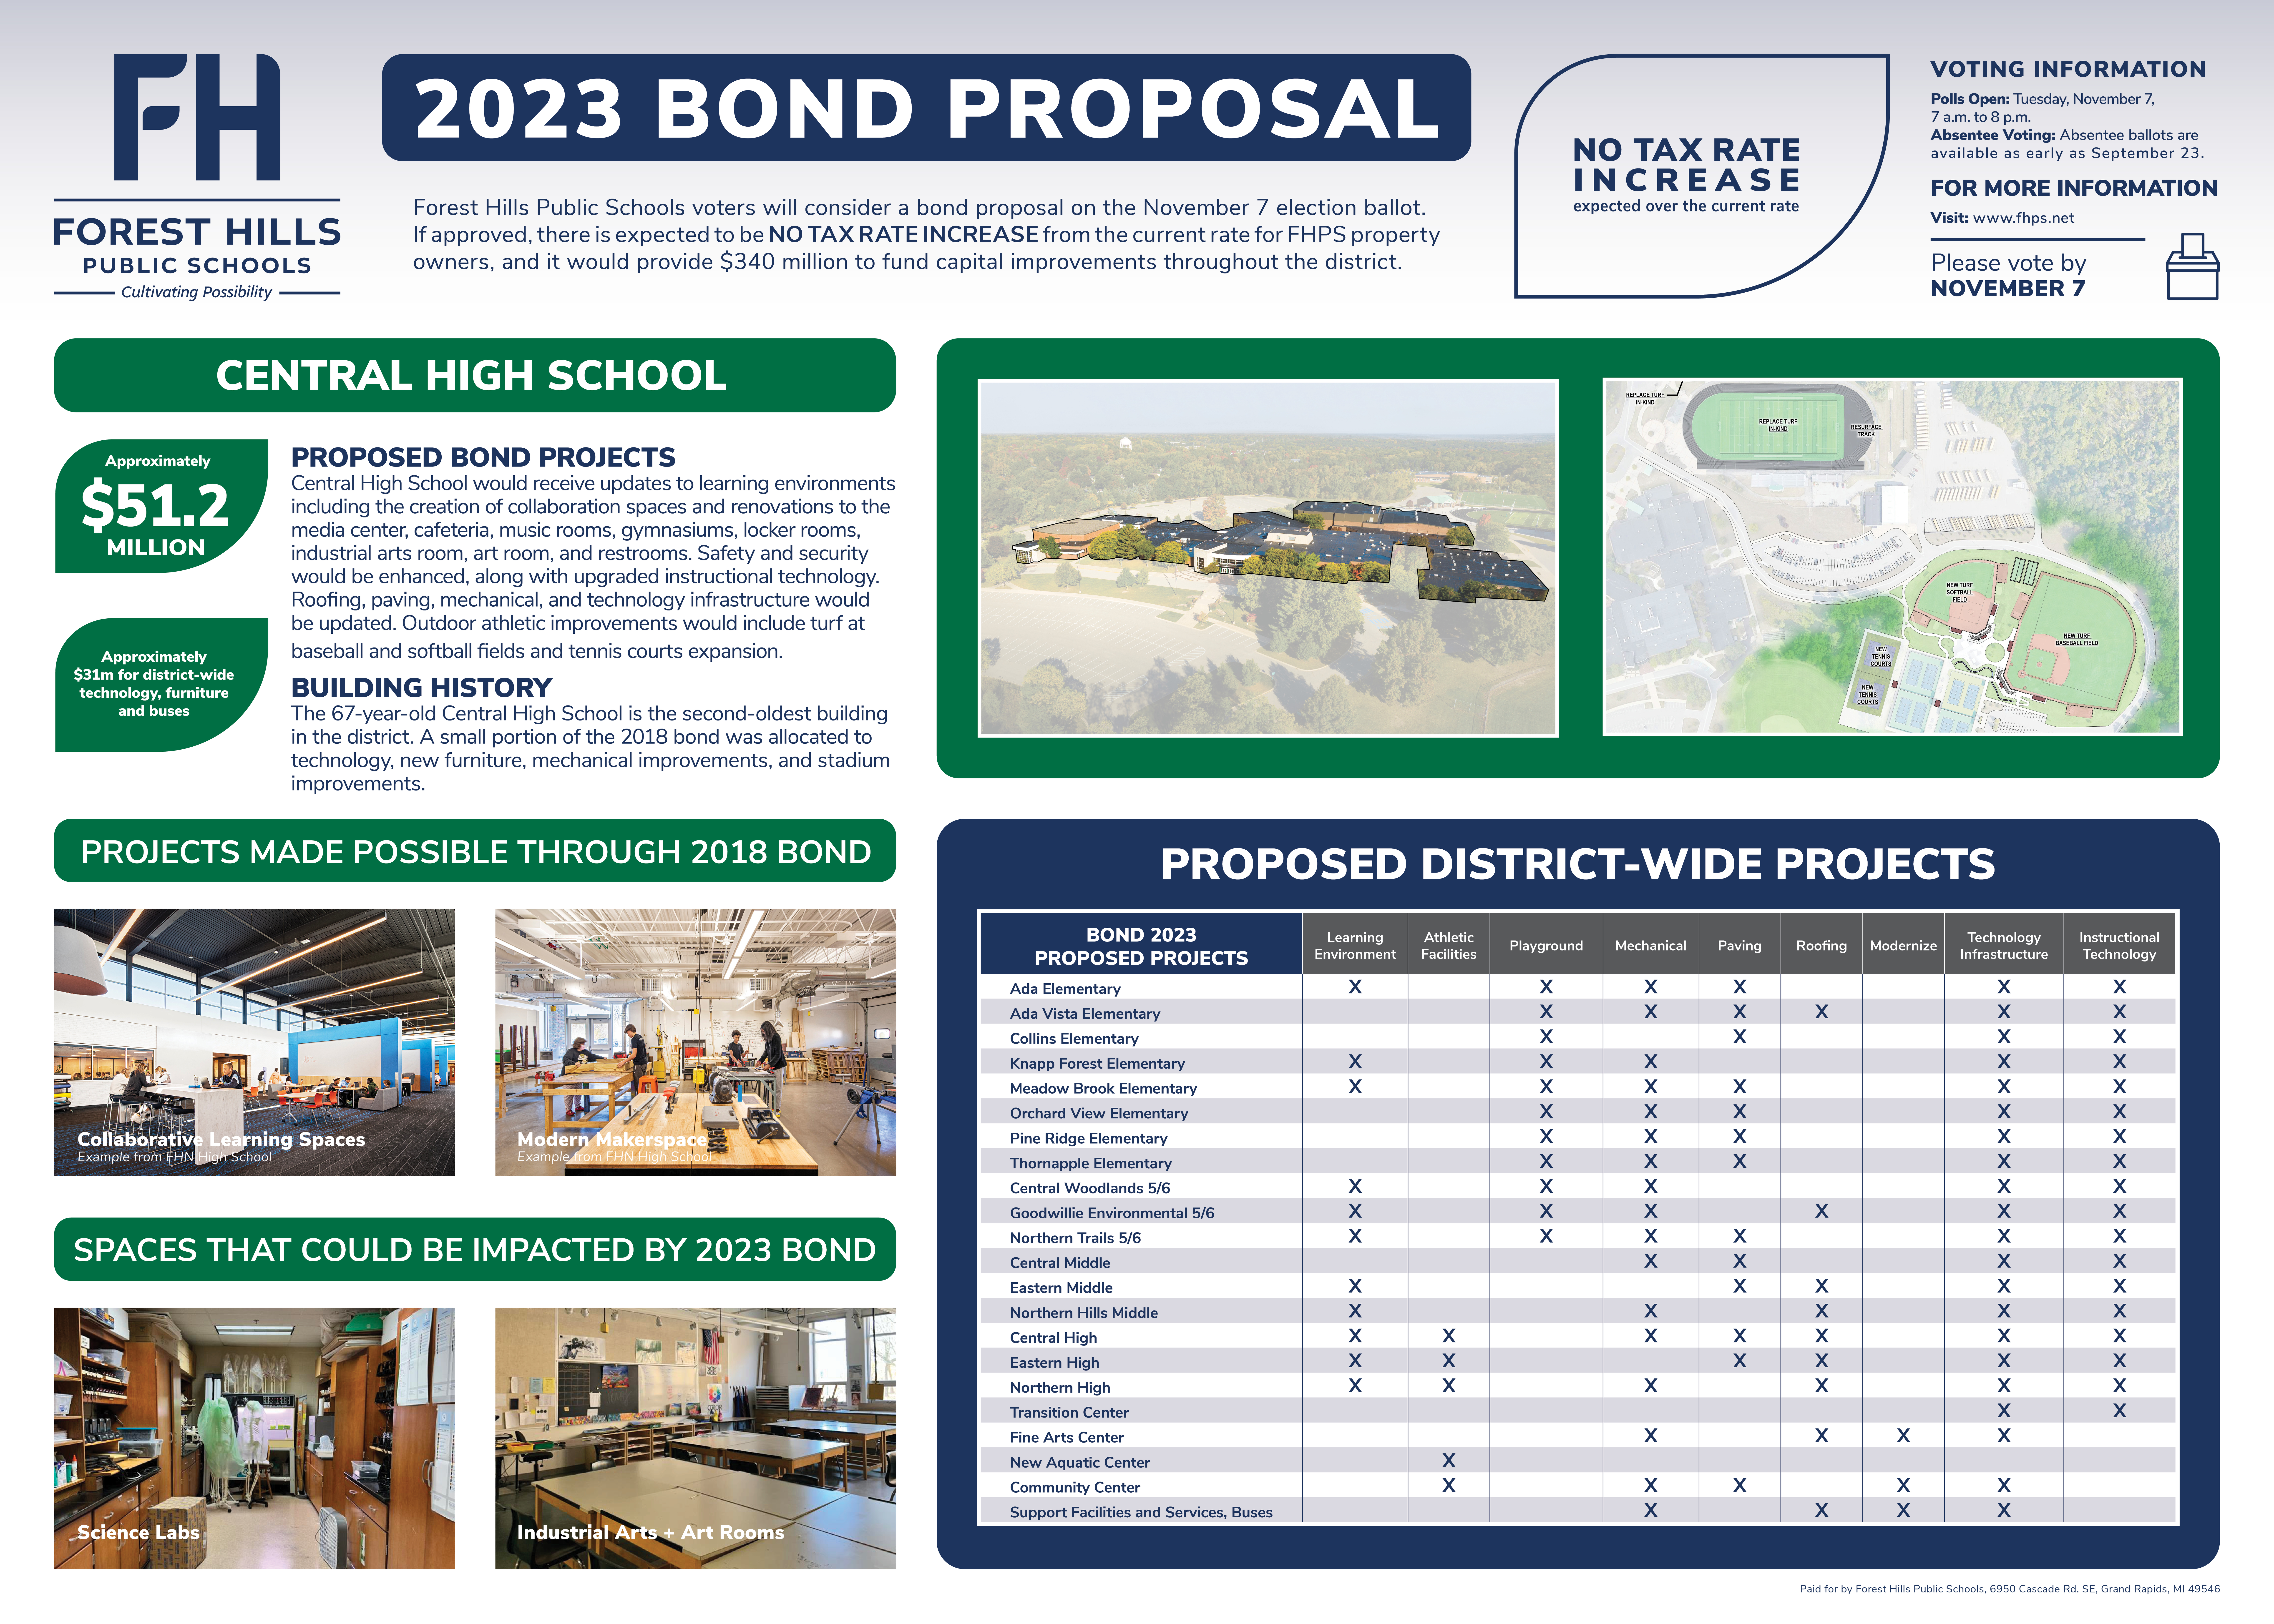 Central High and pictures of the existing building and bond project pictures from 2018 and spaces that could be impacted by the 2023 bond.